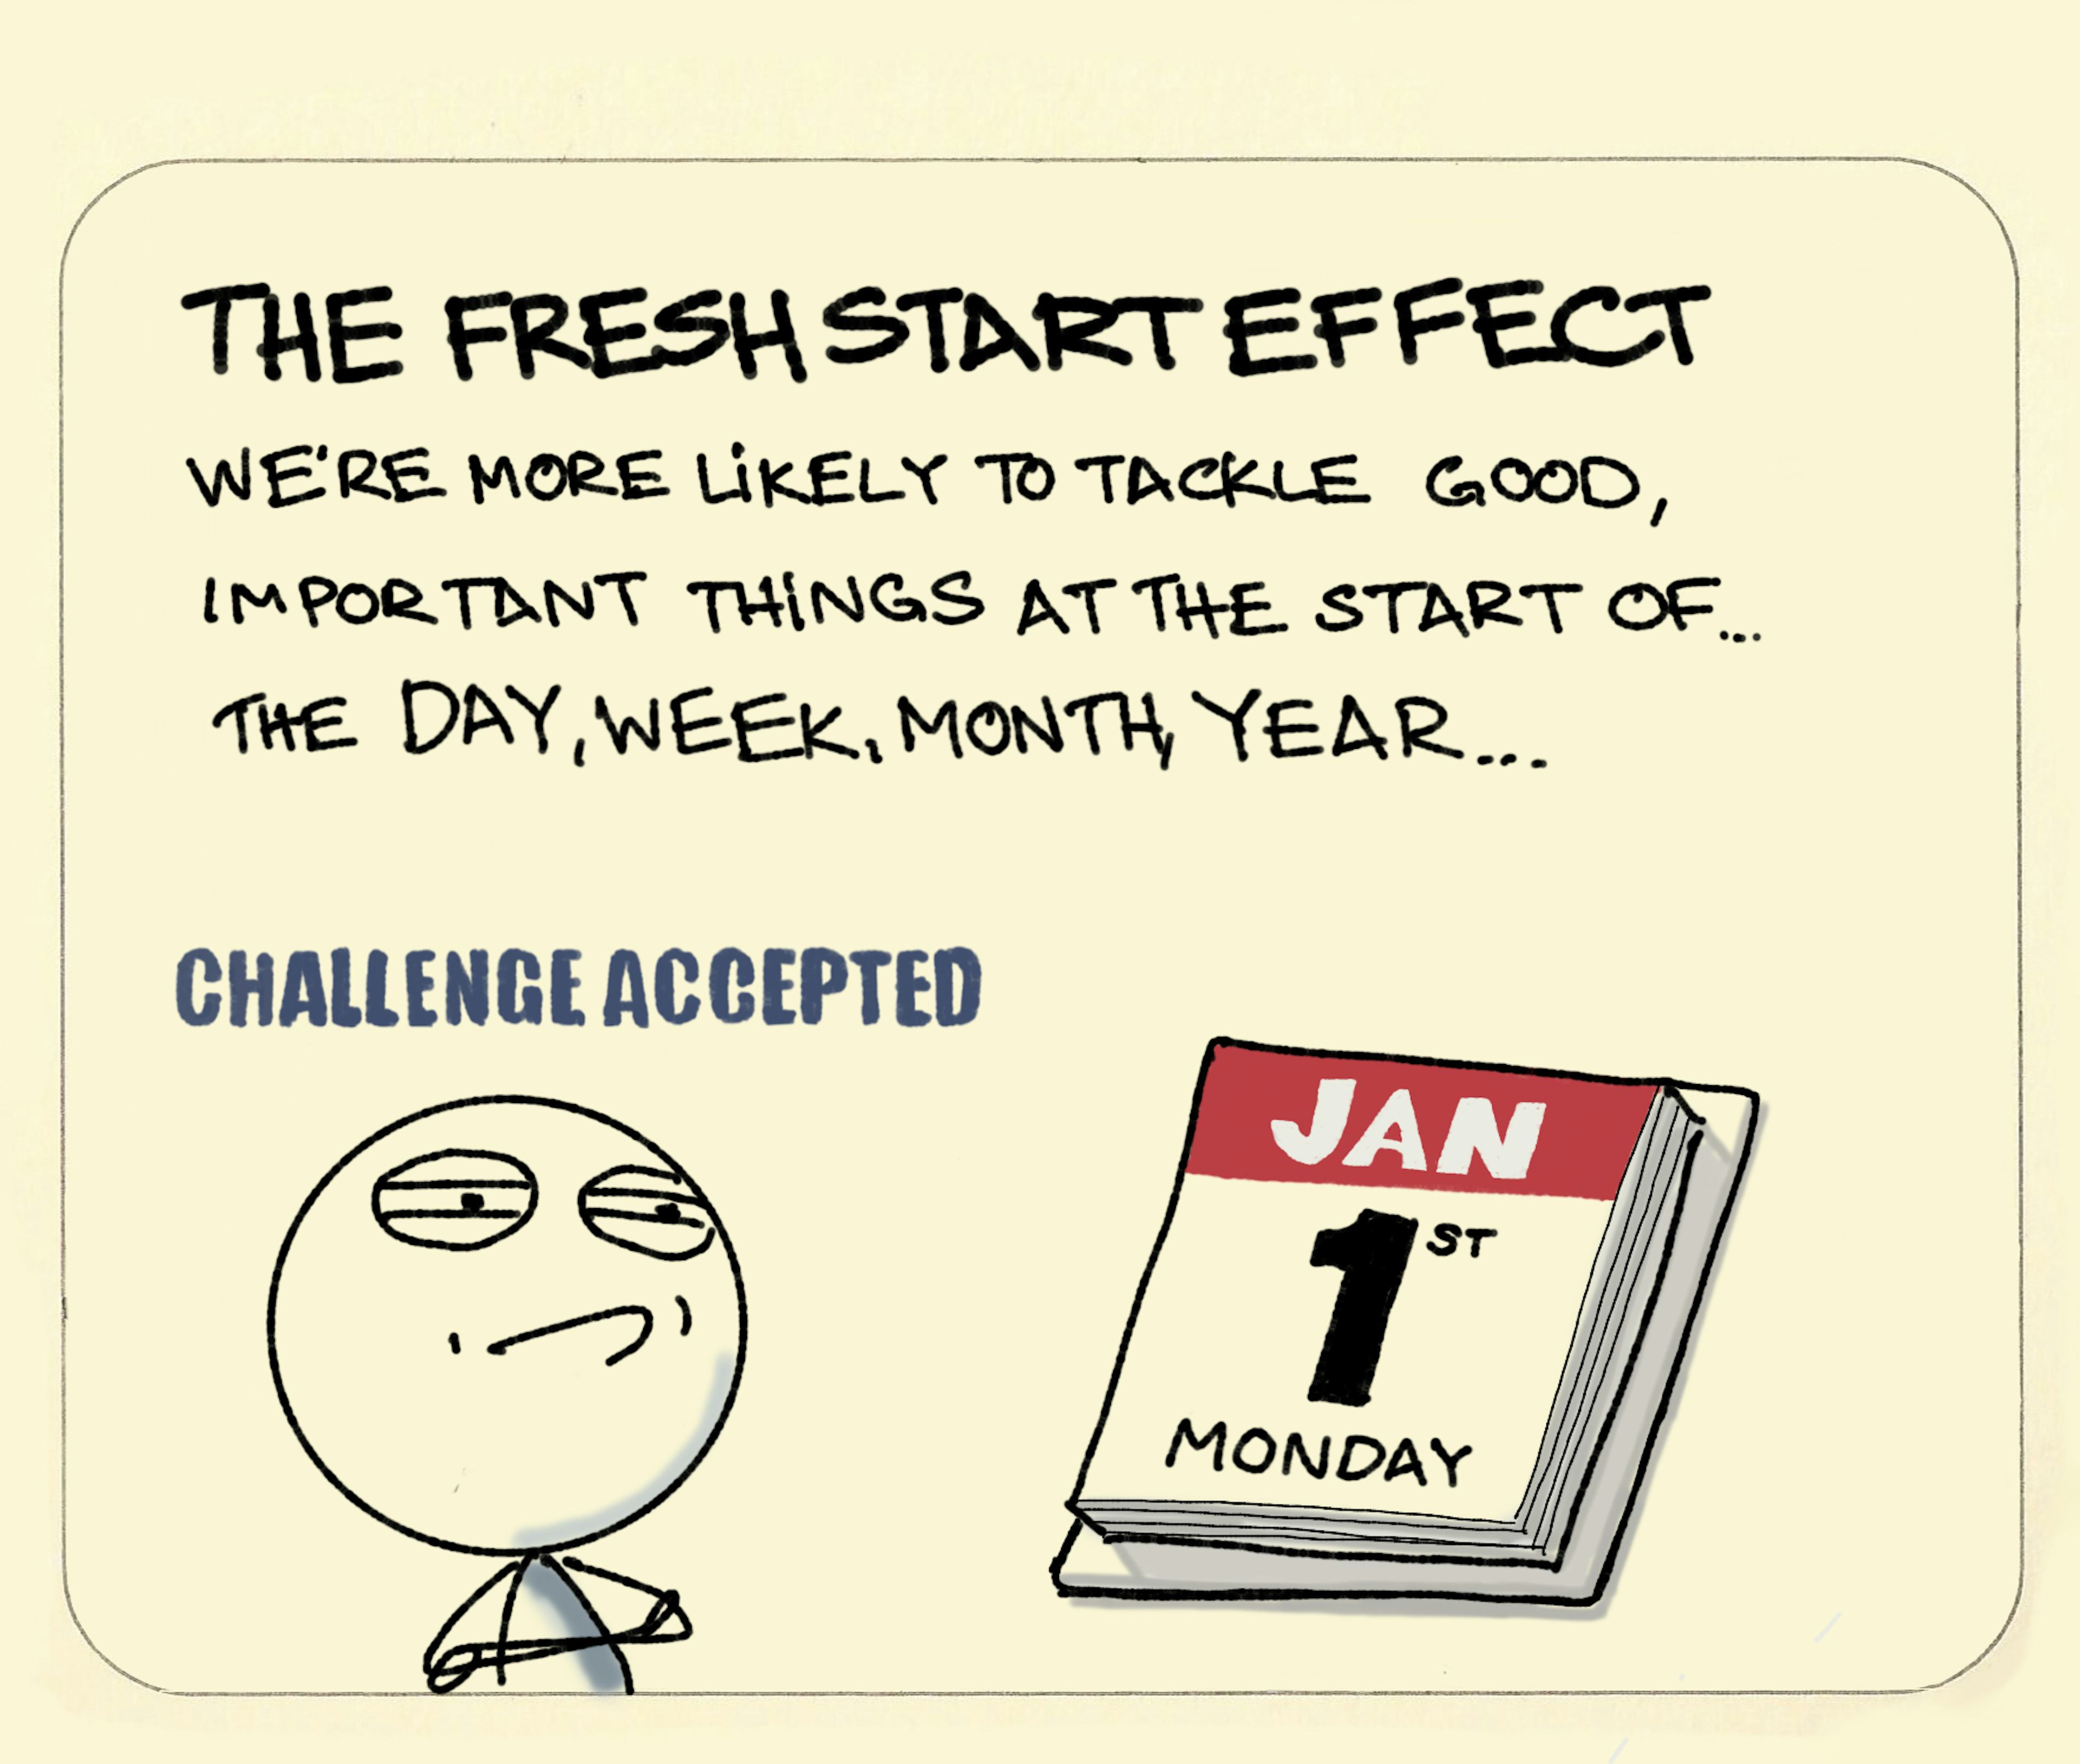 The fresh start effect illustration: a brave person thinks challenge accepted on Monday 1st January thanks to the Fresh start effect from Katy Milkman